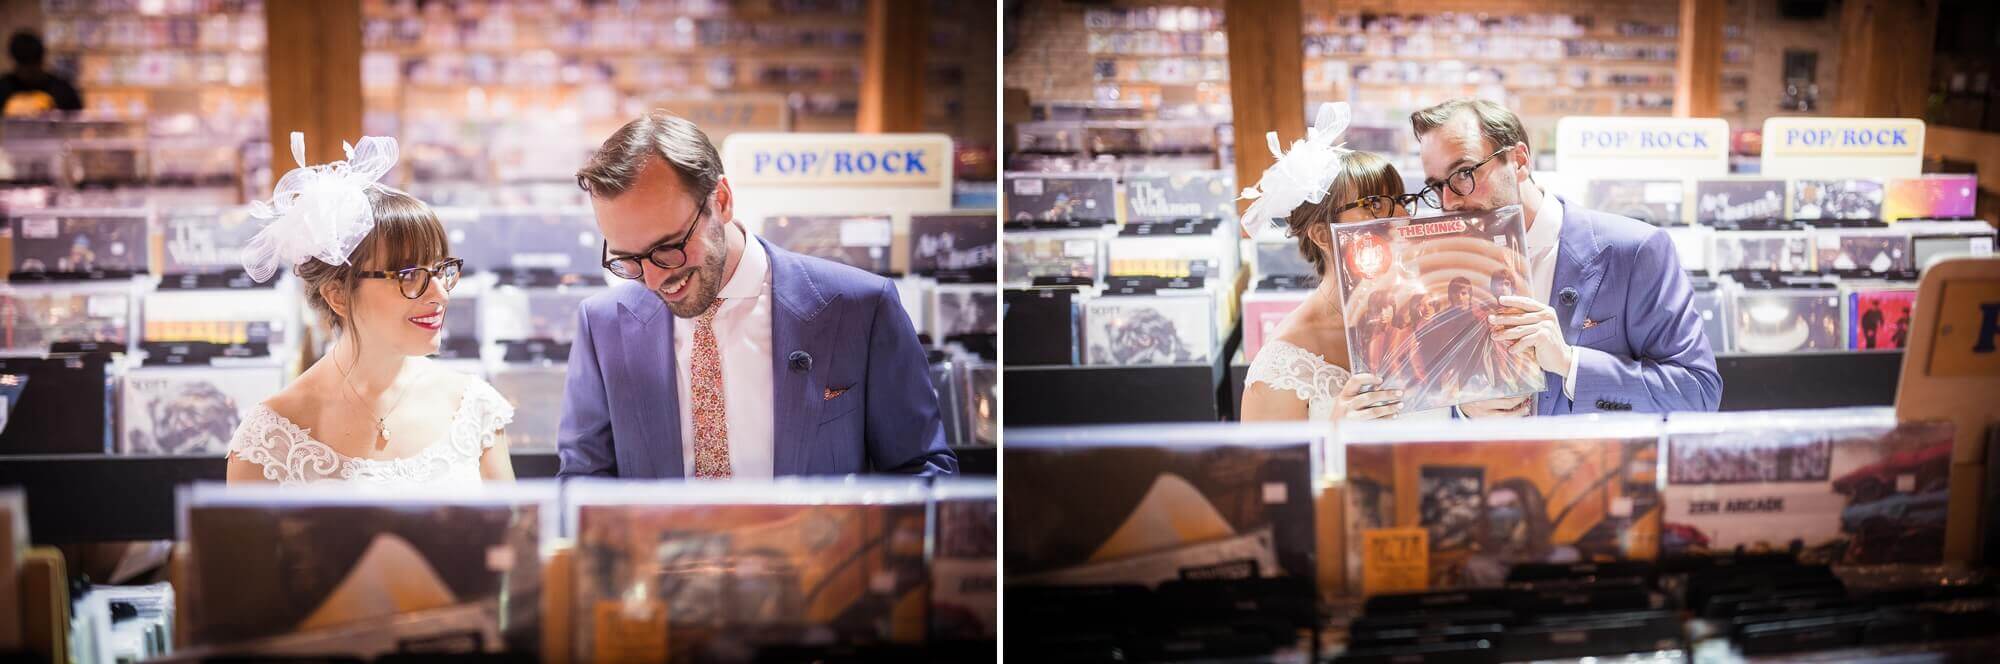 The bride and groom having fun selecting records at the Sonic Boom, Toronto